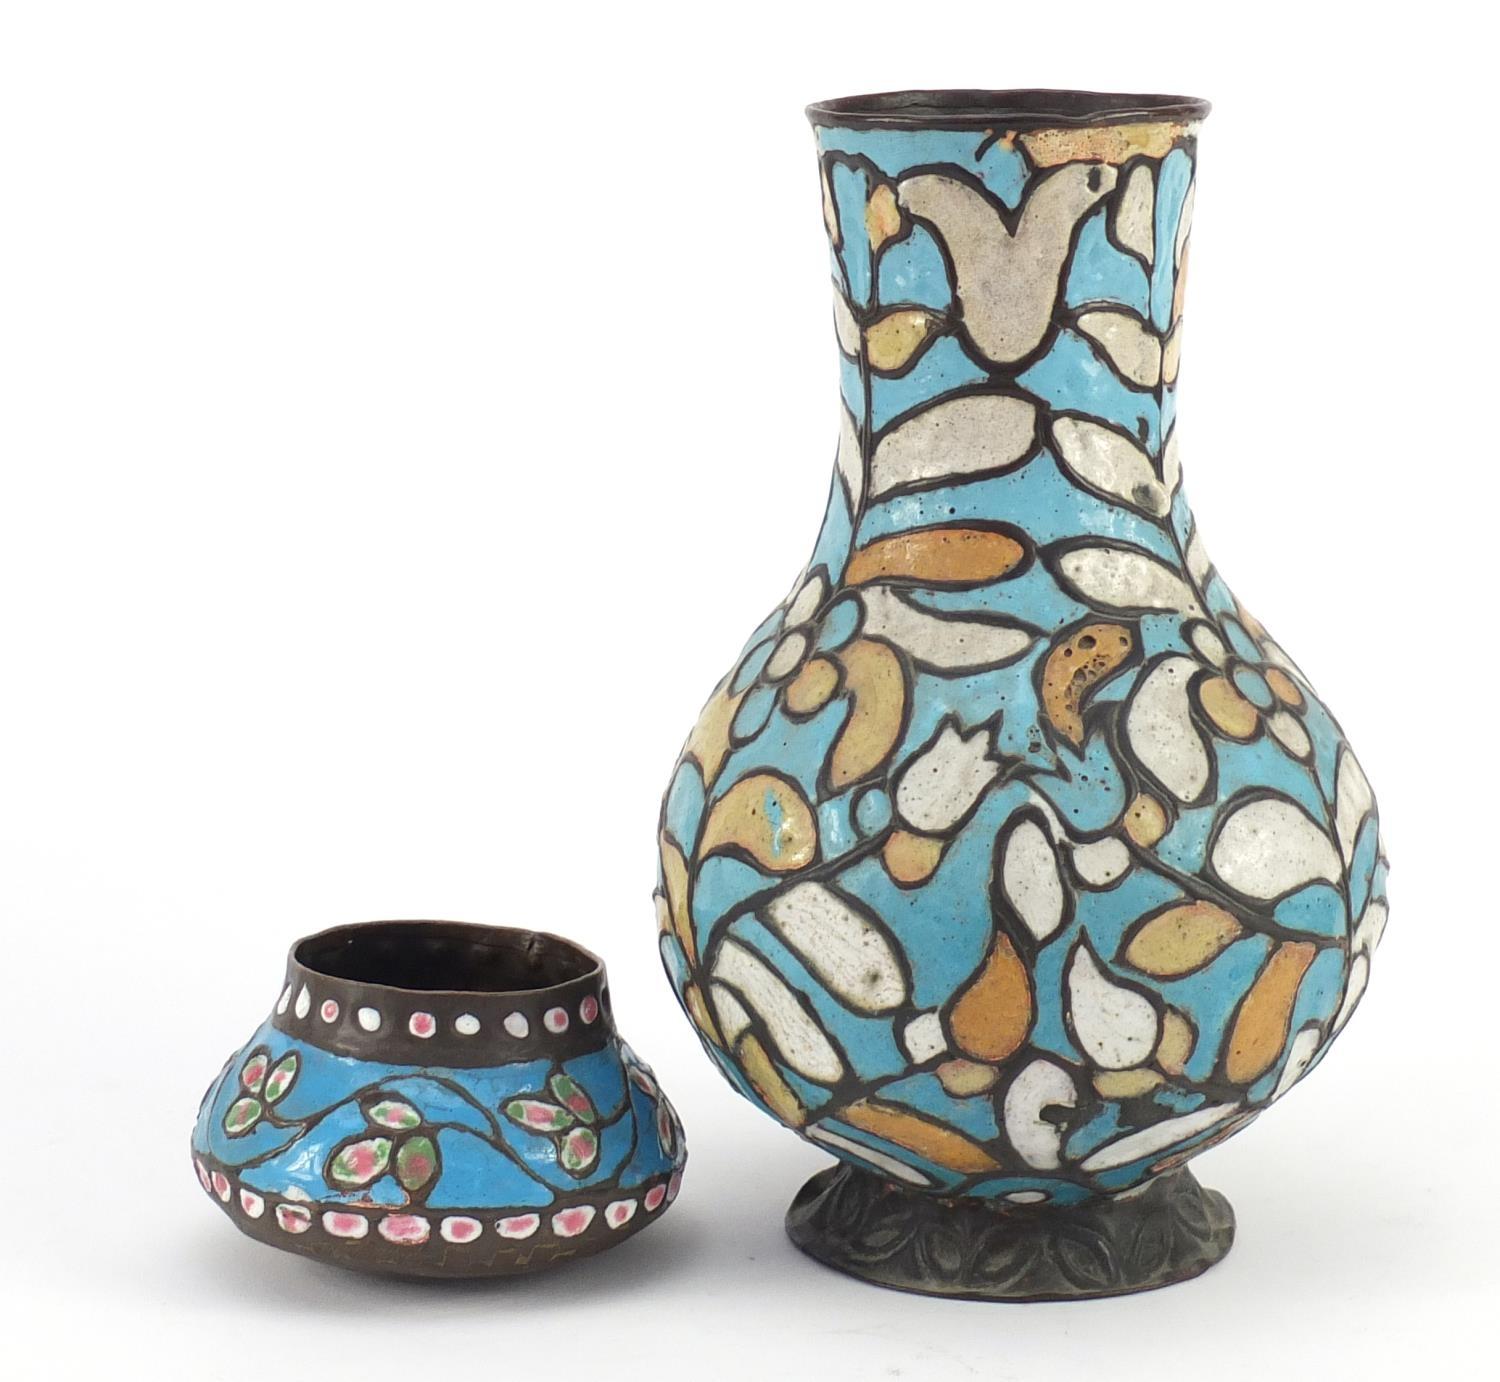 Syrian copper and enamel vase decorated with flowers and a similar small pot, the largest 24cm - Image 4 of 6